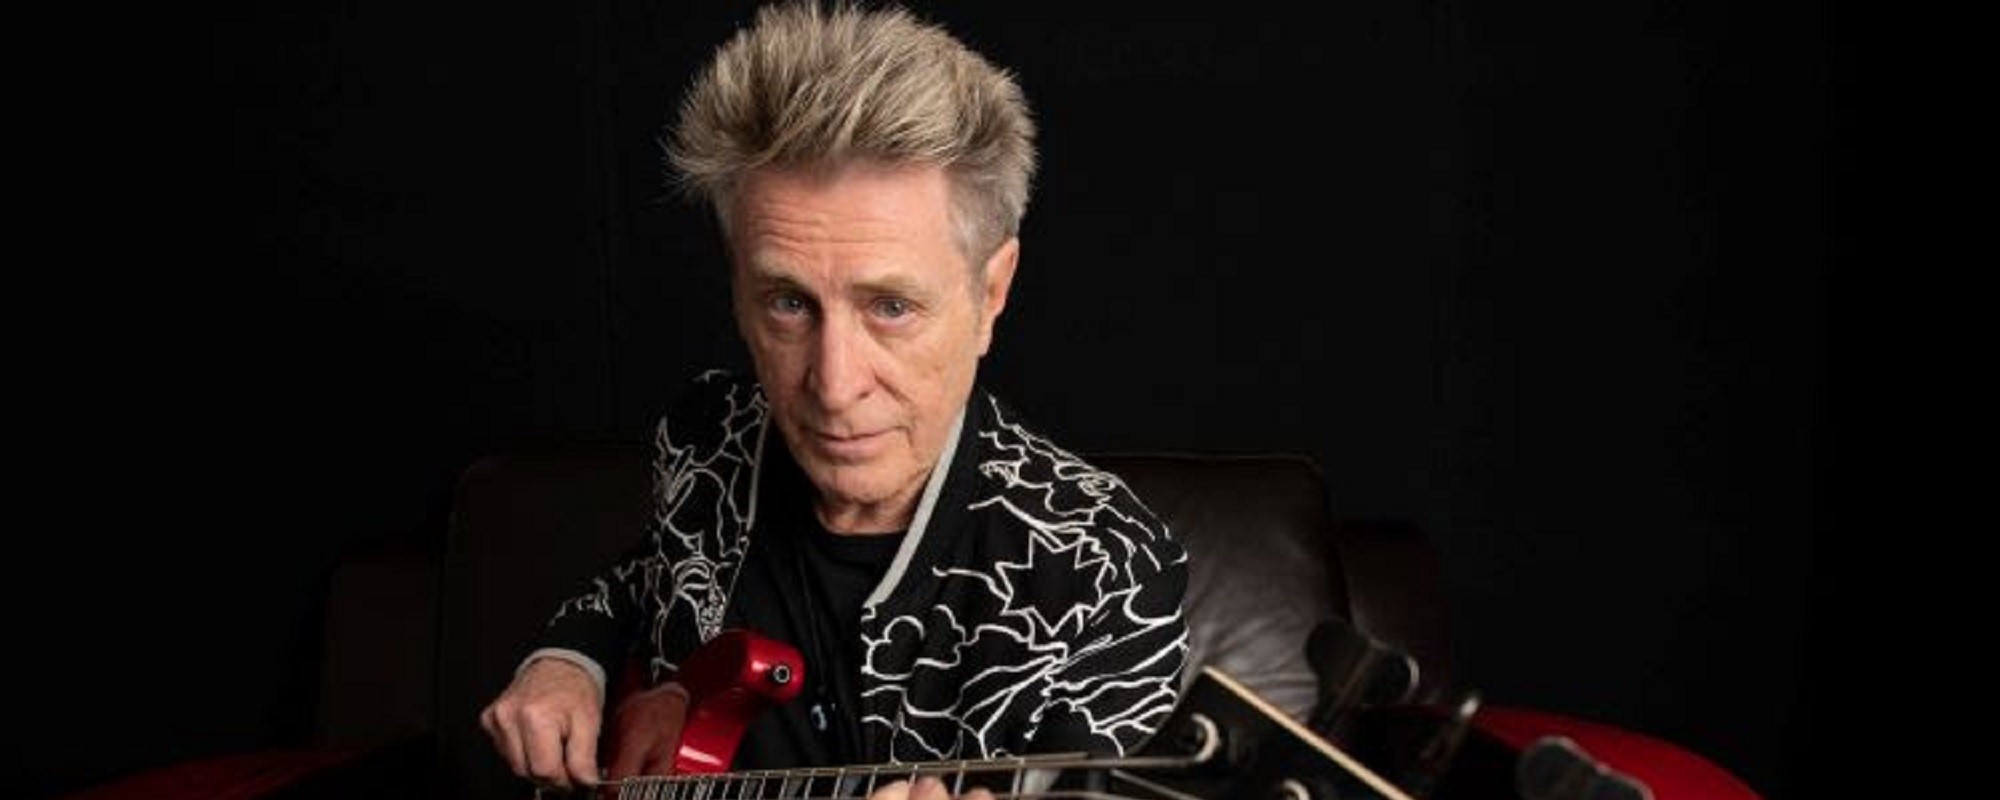 Ex-Journey Bassist Ross Valory to Release Debut Solo Album at 74 Years Old; Listen to Lead Single “Tomland”